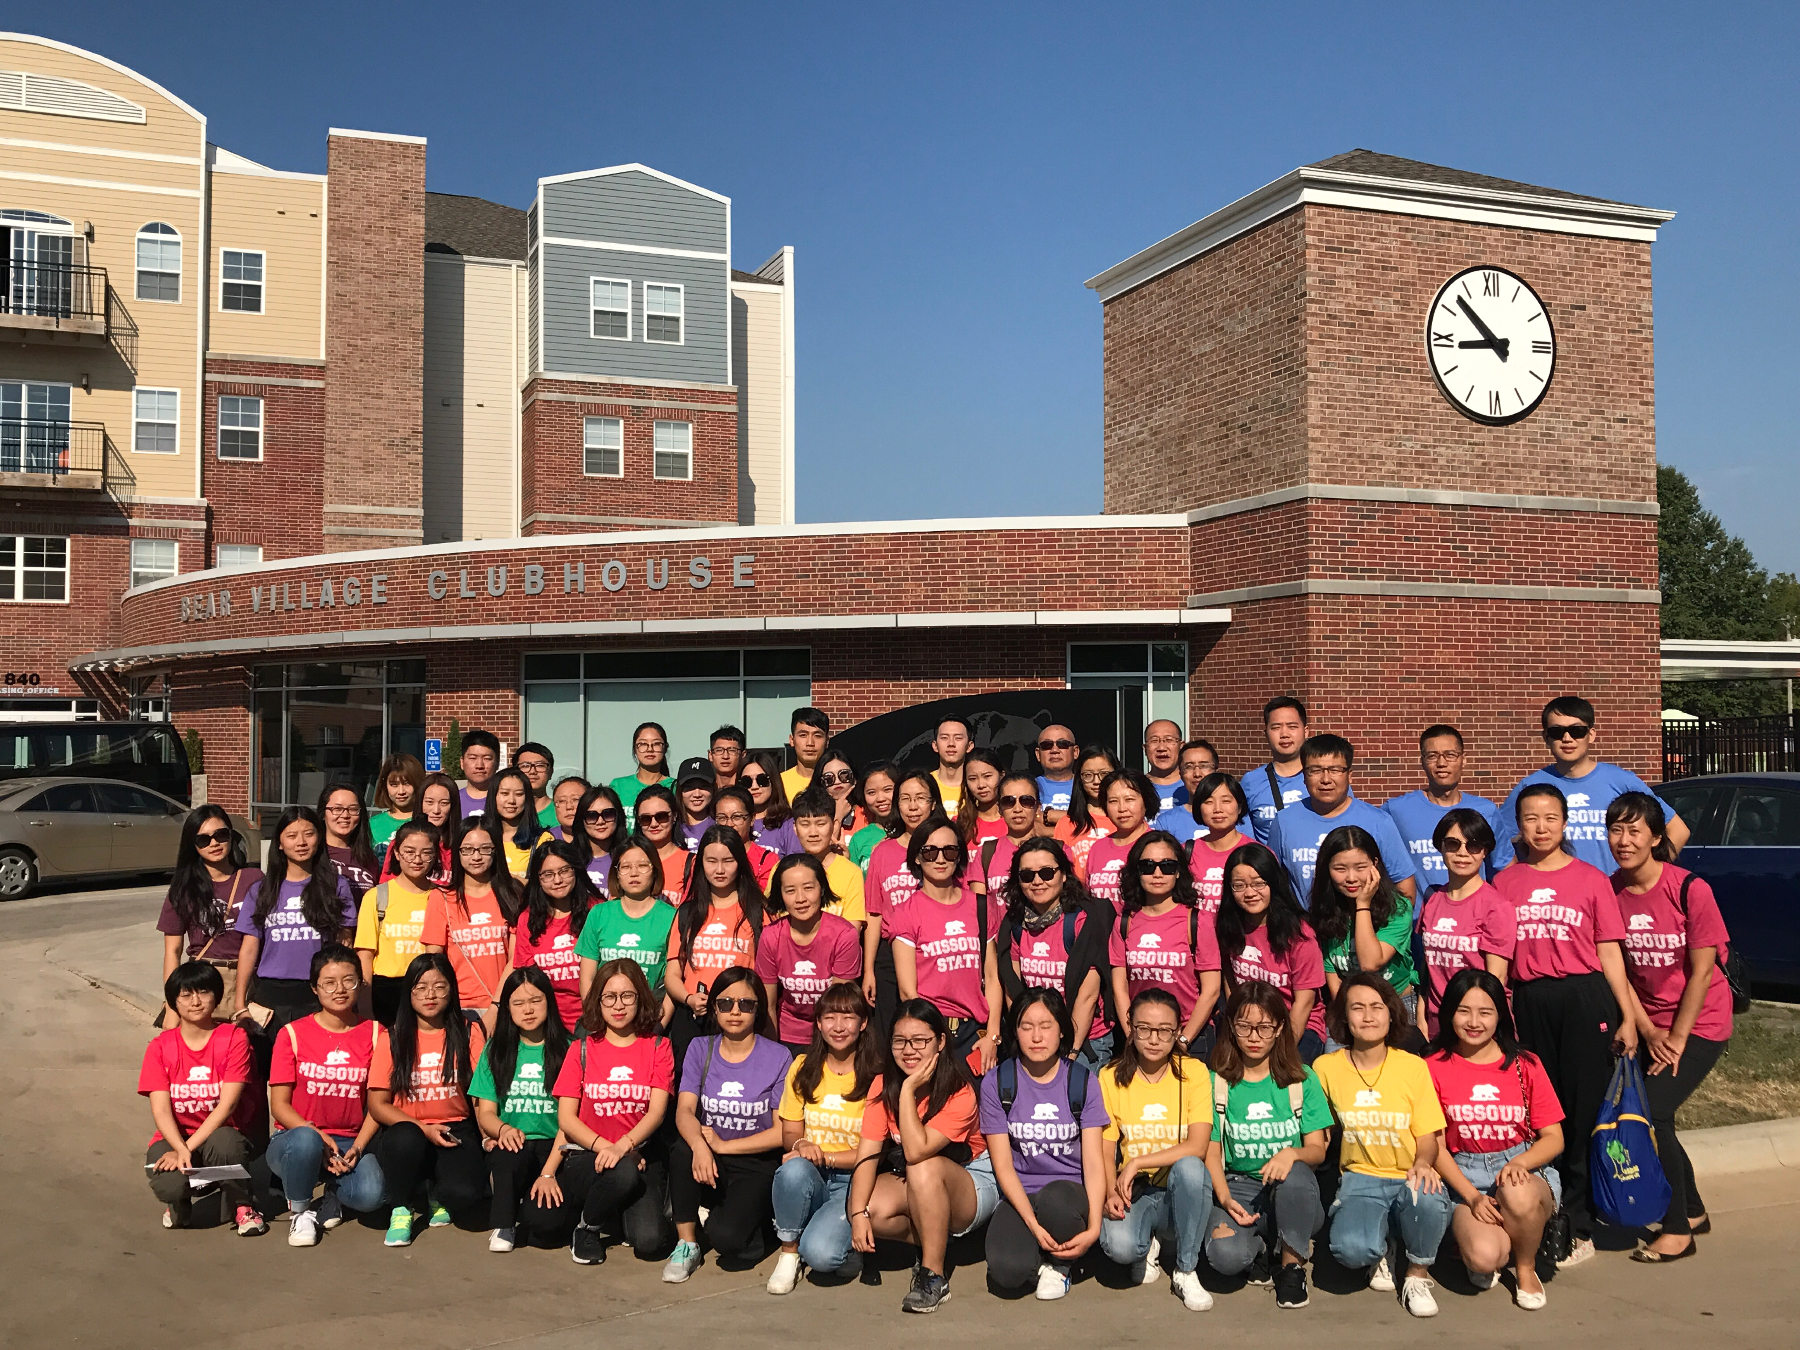 Ningxia University students and faculty pose in front of their new home, Bear Village.